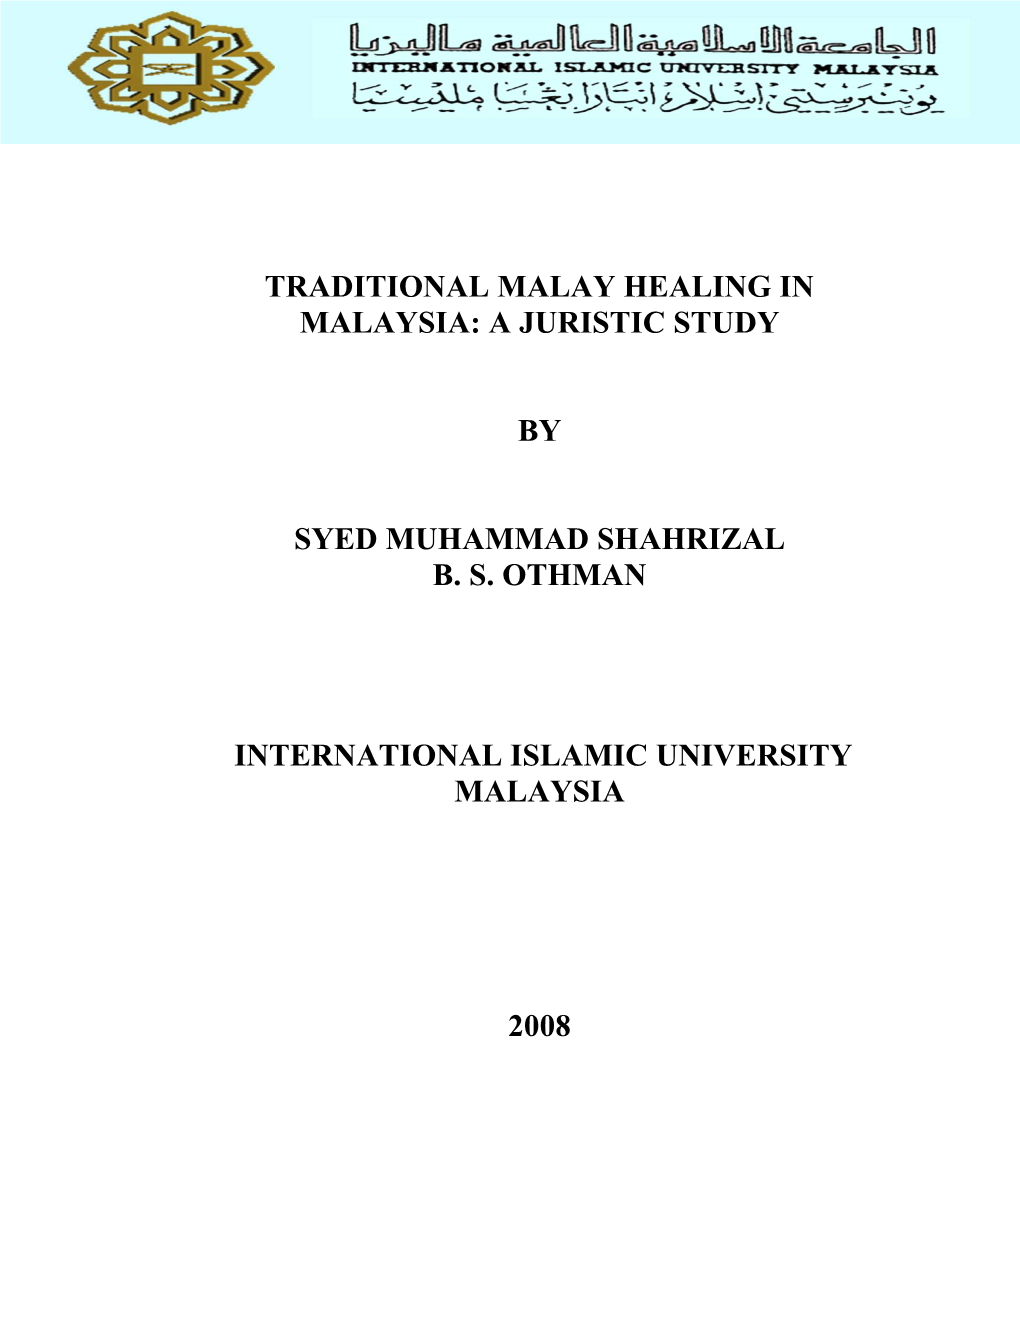 Traditional Malay Healing in Malaysia: a Juristic Study by Syed Muhammad